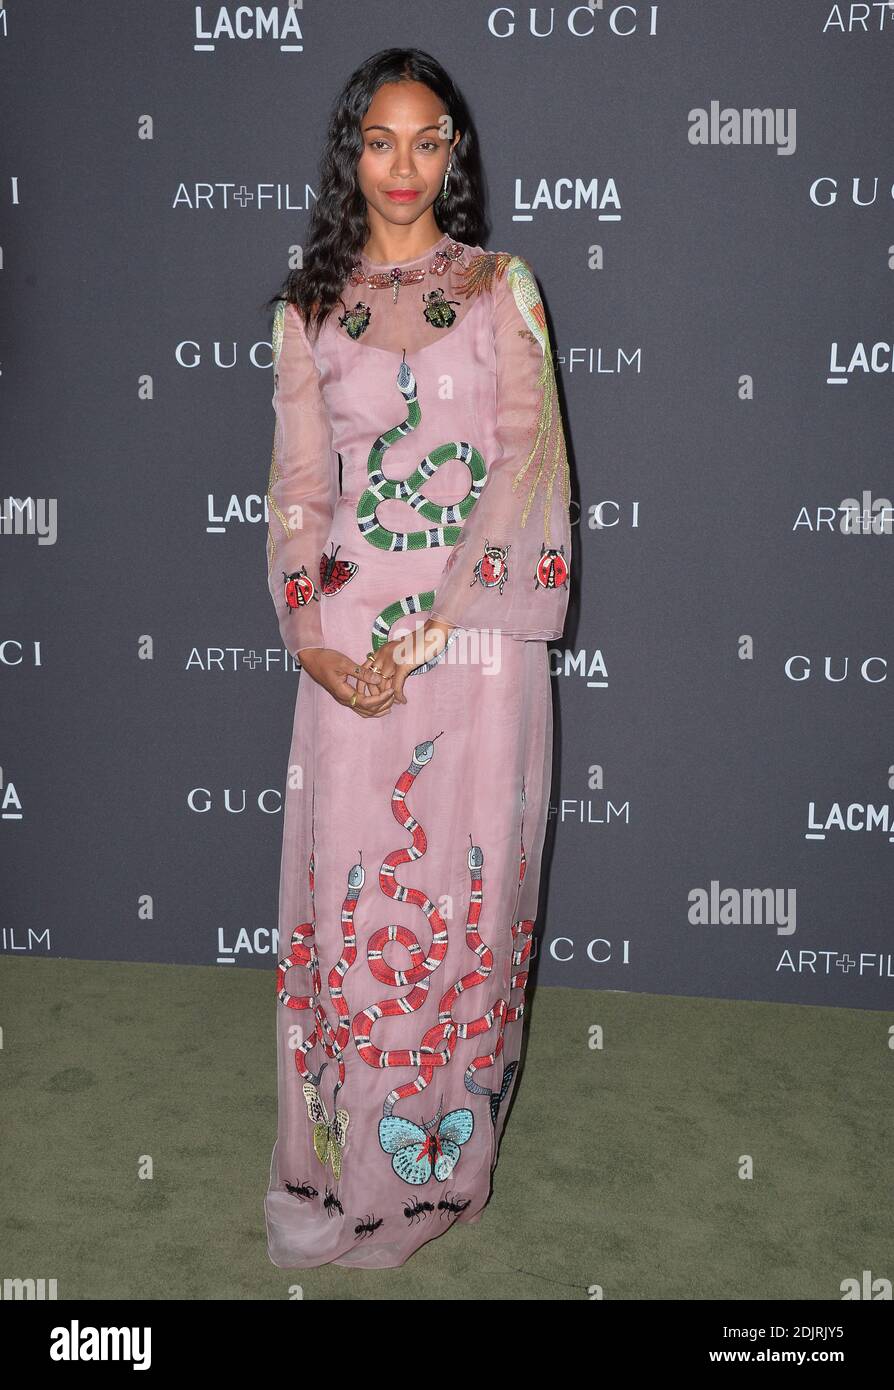 Zoe Saldana attends the 2016 LACMA Art + Film Gala honoring Robert Irwin and Kathryn Bigelow presented by Gucci at LACMA on October 29, 2016 in Los Angeles, California. Photo by Lionel Hahn/AbacaUsa.com Stock Photo